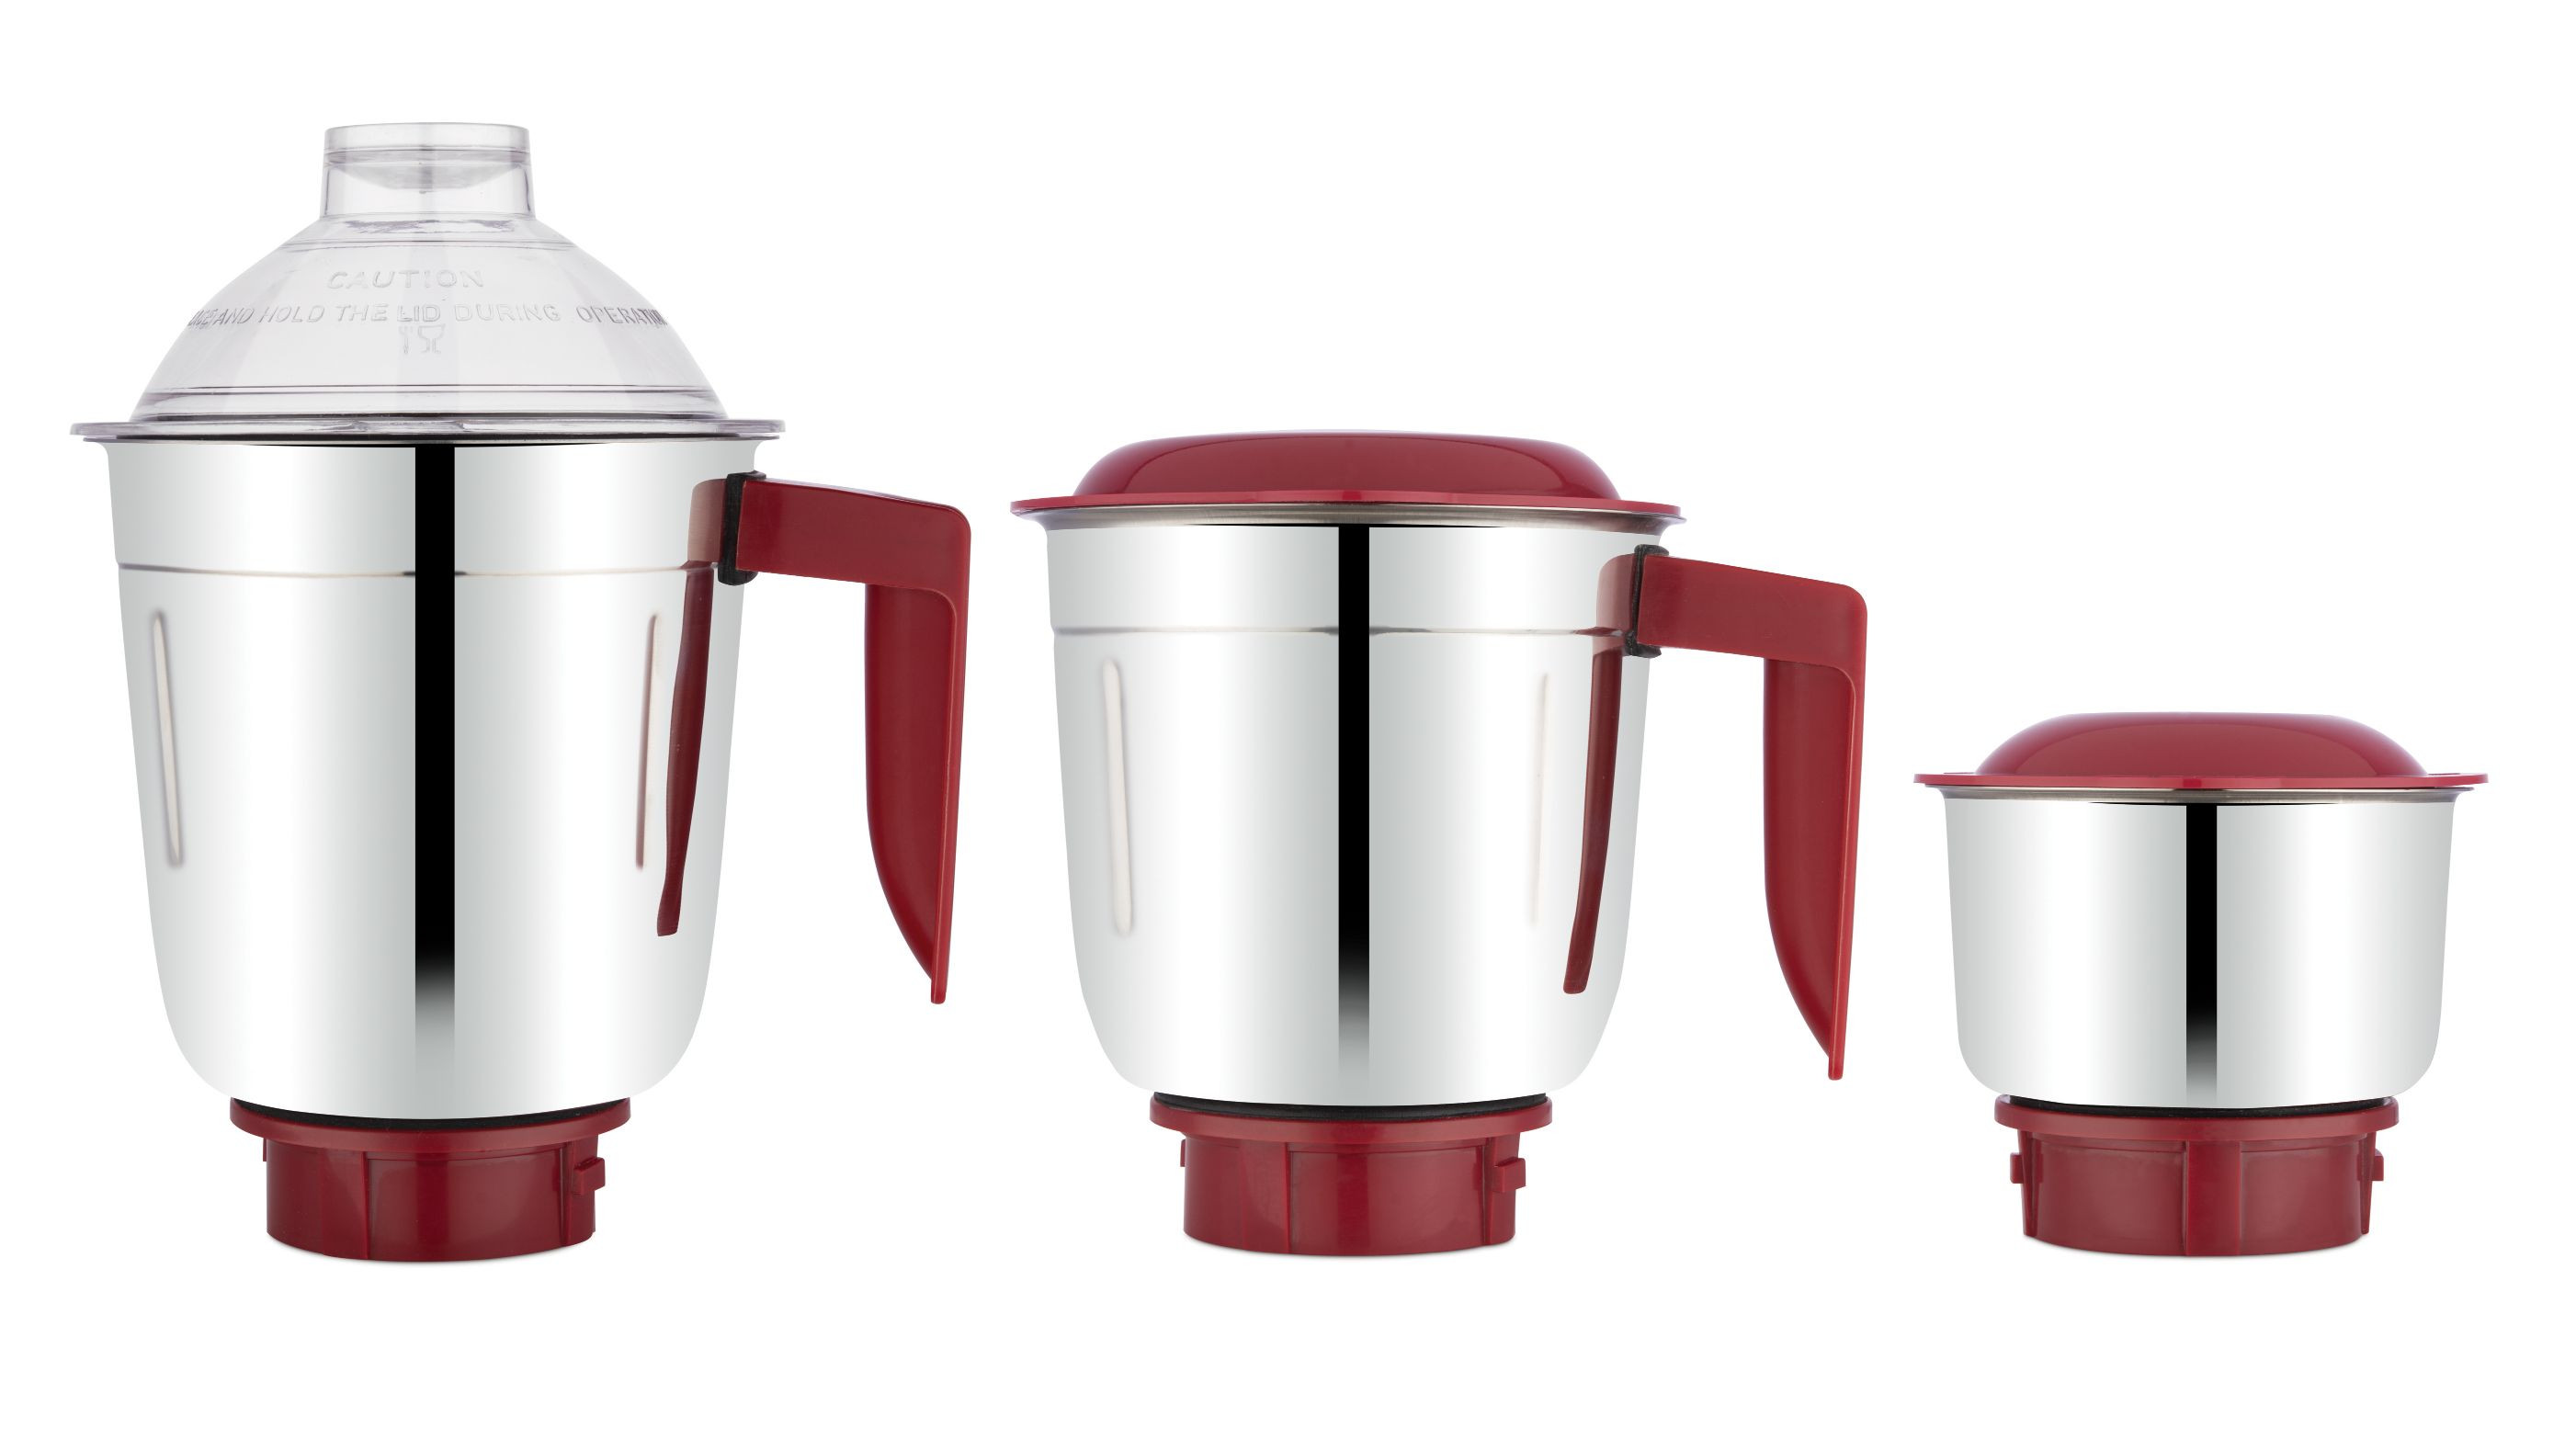 bajaj-classic-pro-600w-indian-mixer-grinder-with-special-chef-jar-stainless-steel-jars-indian-mixer-grinder-spice-coffee-grinder-110v-for-use-in-canada-usa8